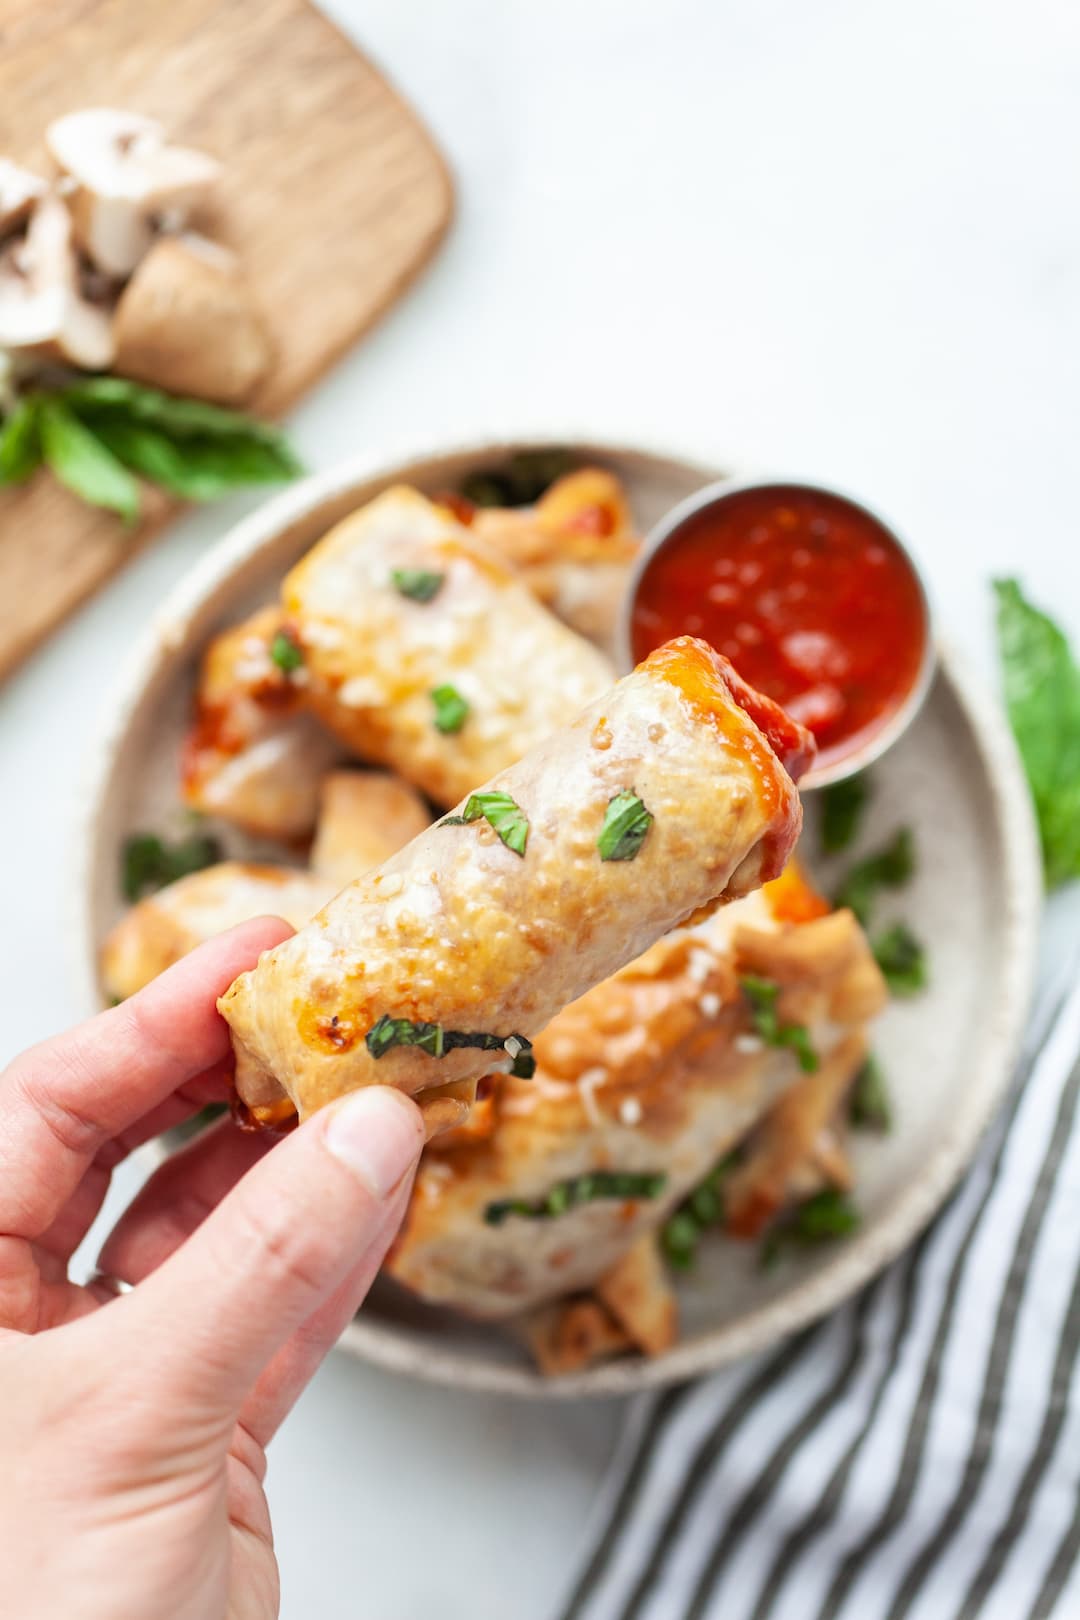 image of a hand picking up an air fryer pizza roll from a plate with more air fryer pizza rolls